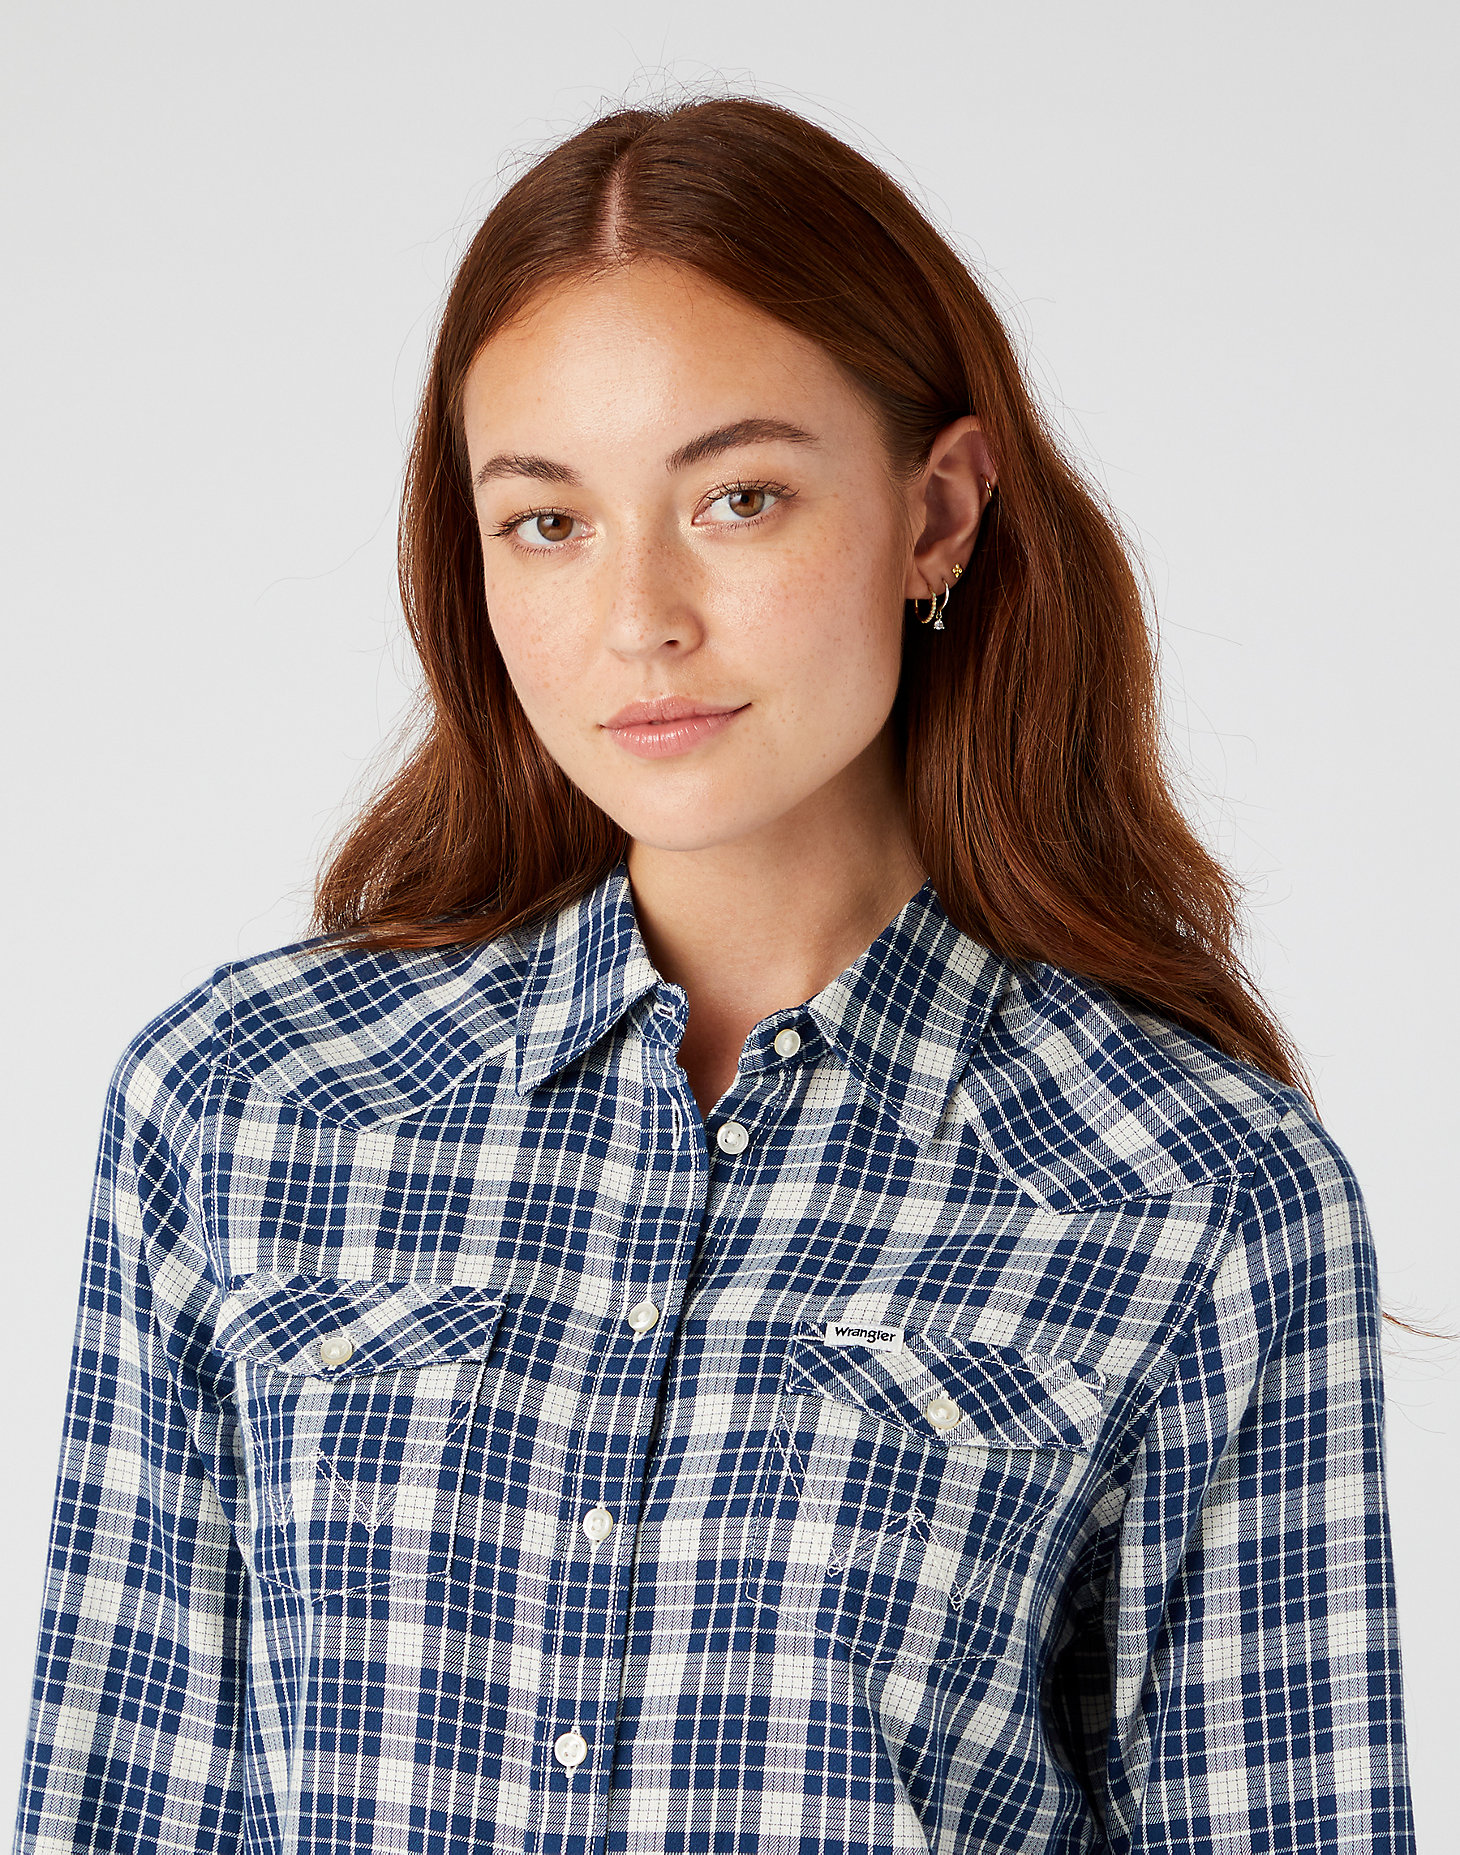 Western Check Shirt in Medieval Blue alternative view 3